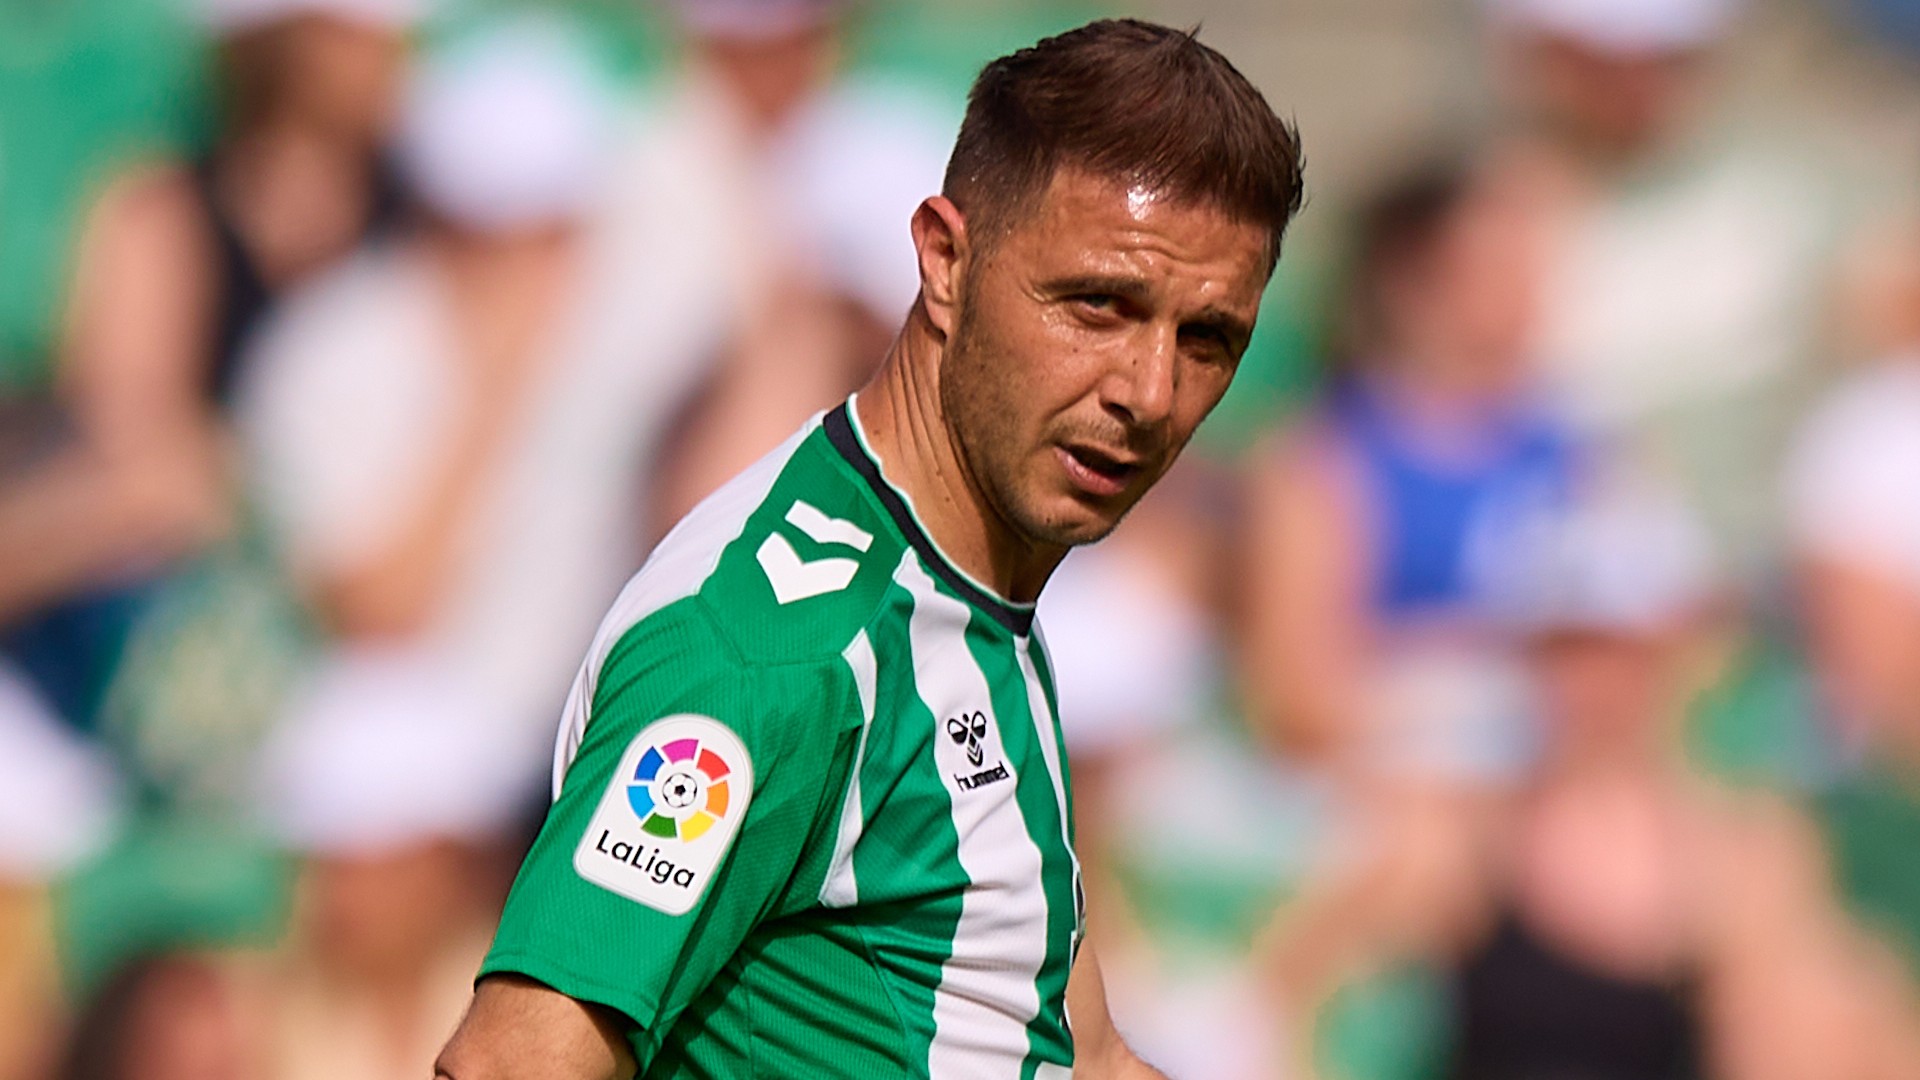 Betis legend and ex-Spain star Joaquin to retire